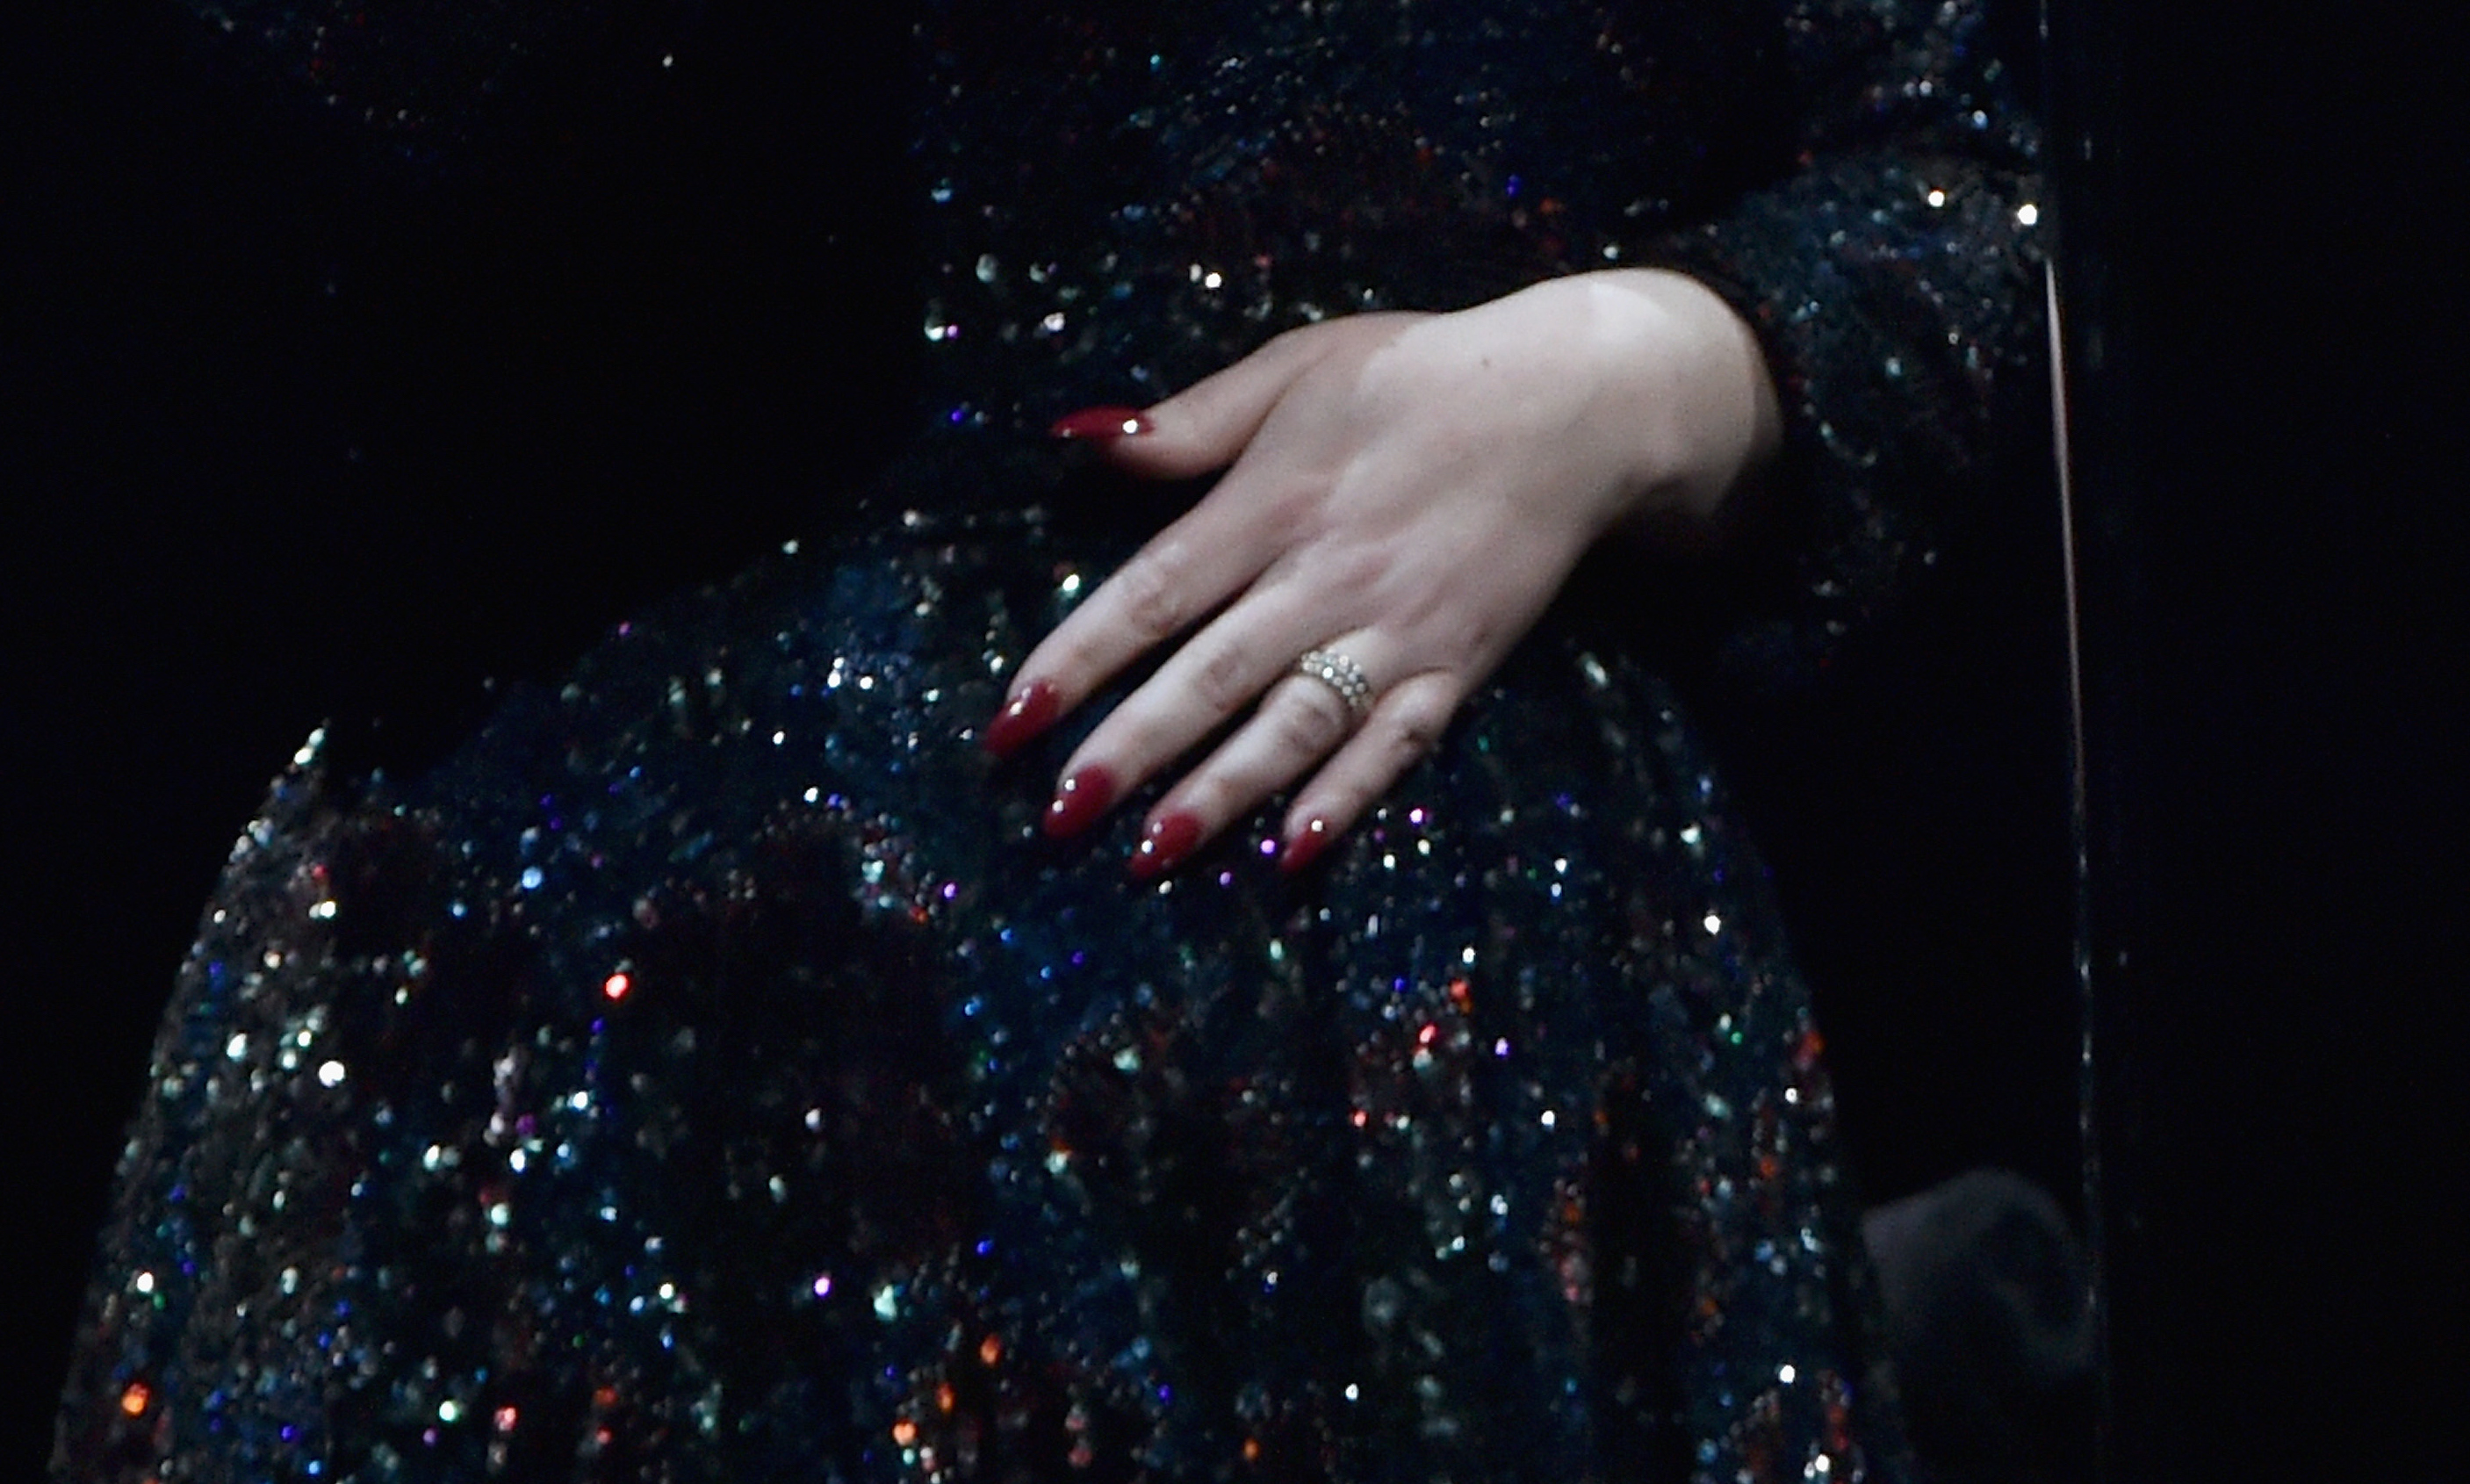 Ring suggests Adele might be engaged